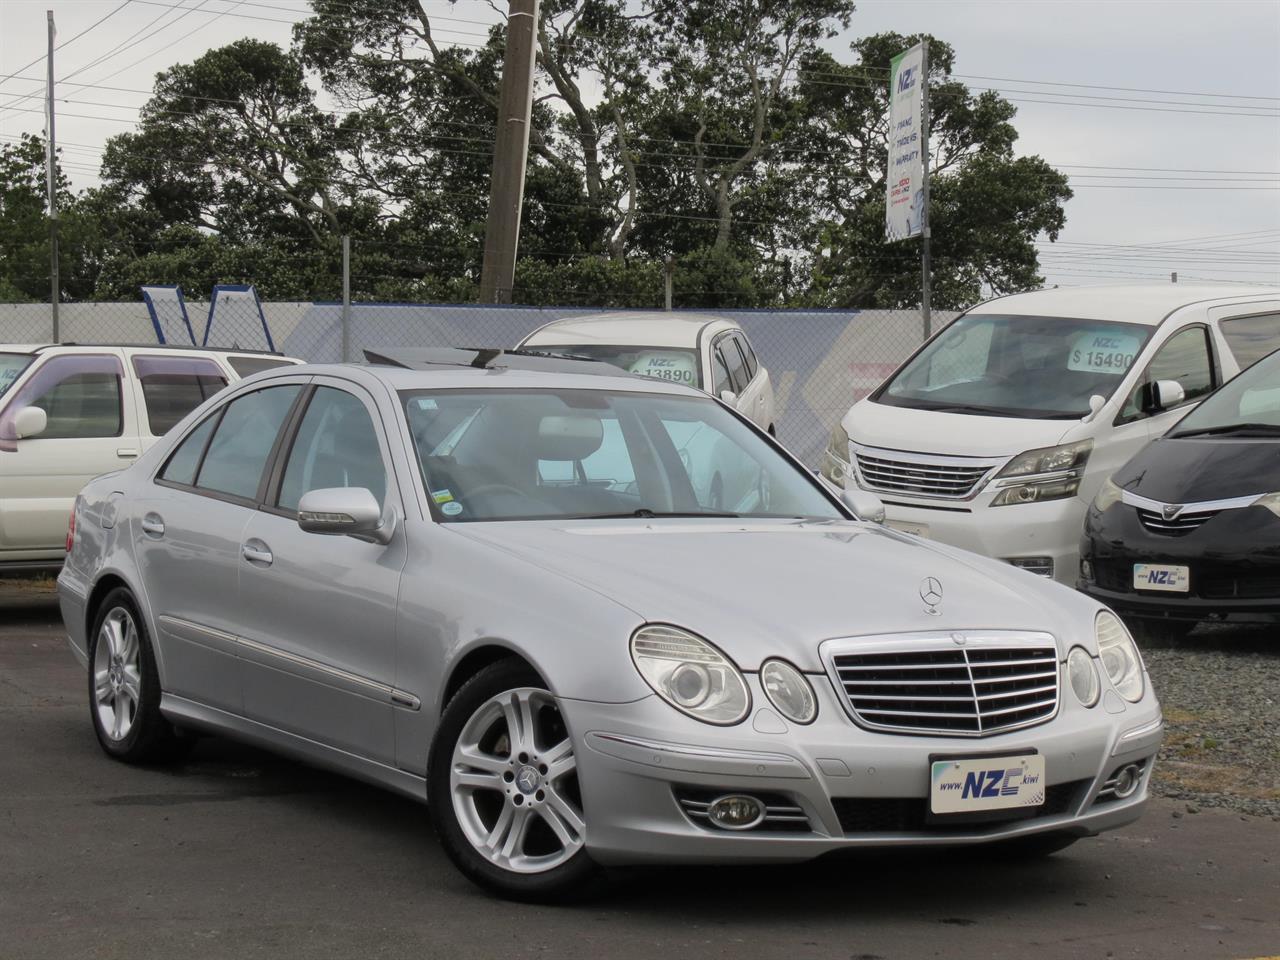 NZC 2008 MERCEDES BENZ E 320 just arrived to Auckland